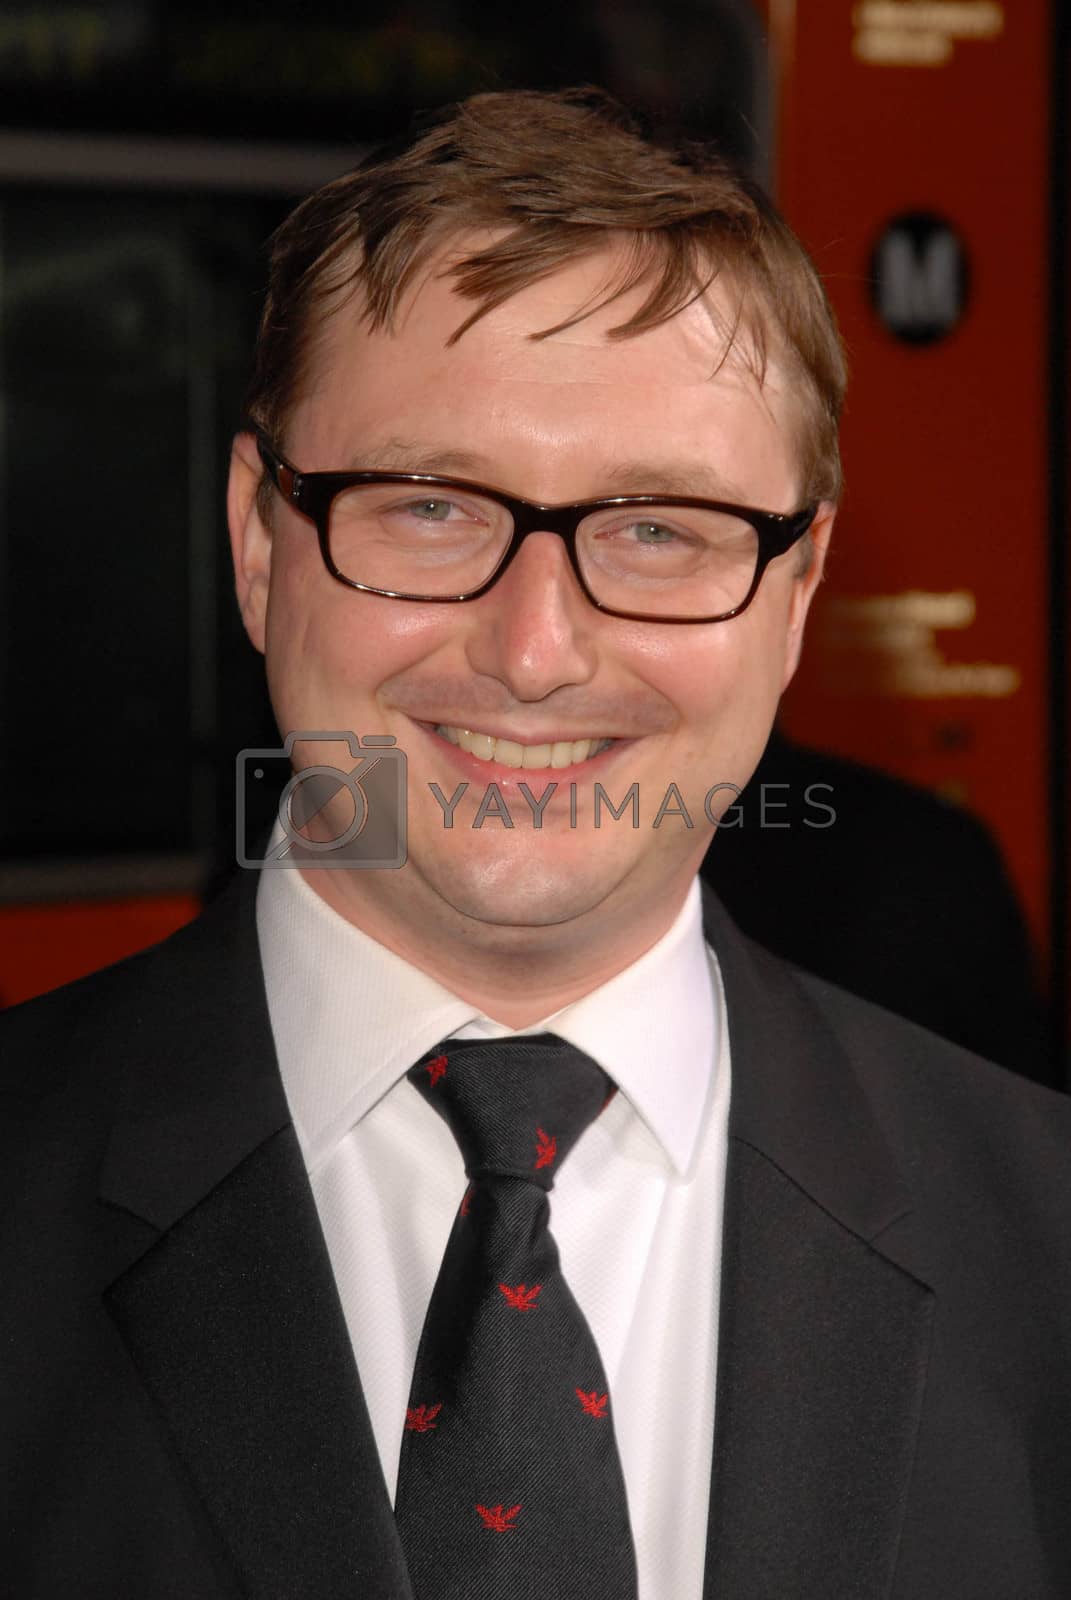 Royalty free image of John Hodgman
at the US Premiere of 'The Invention of Lying'. Grauman's Chinese Theatre, Hollywood, CA. 09-21-09/ImageCollect by ImageCollect